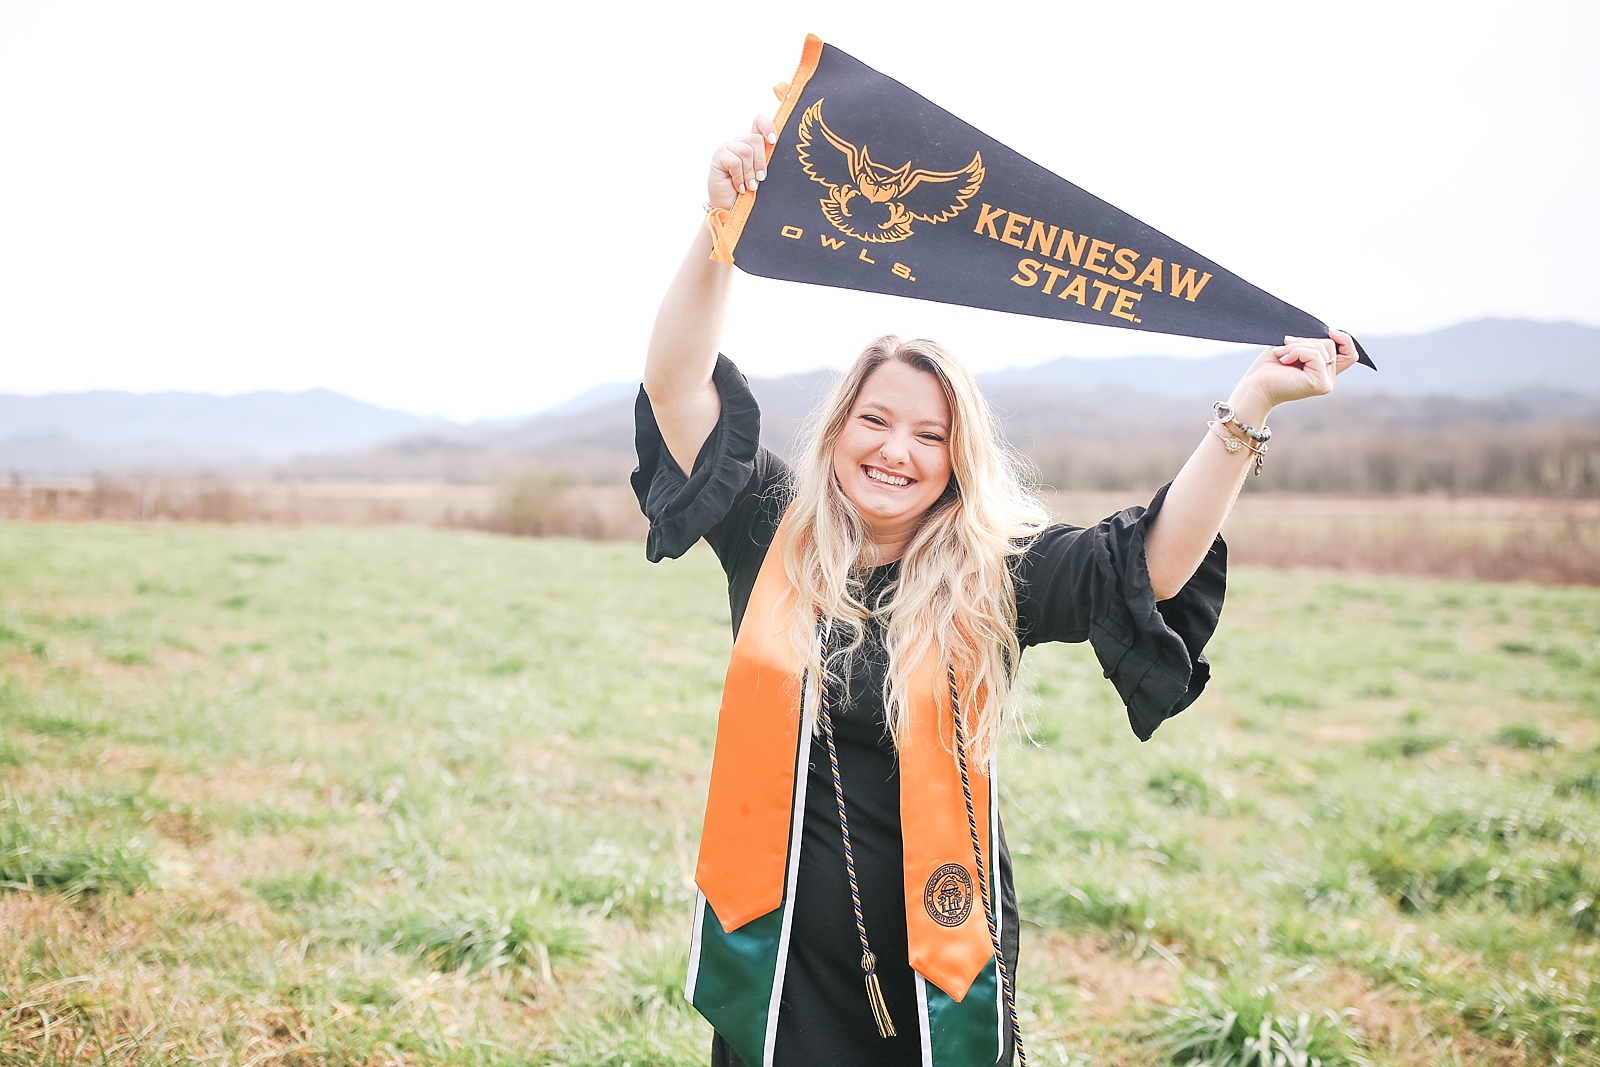 Kennesaw State University Senior Session Rachel smiling with pennant over head photo